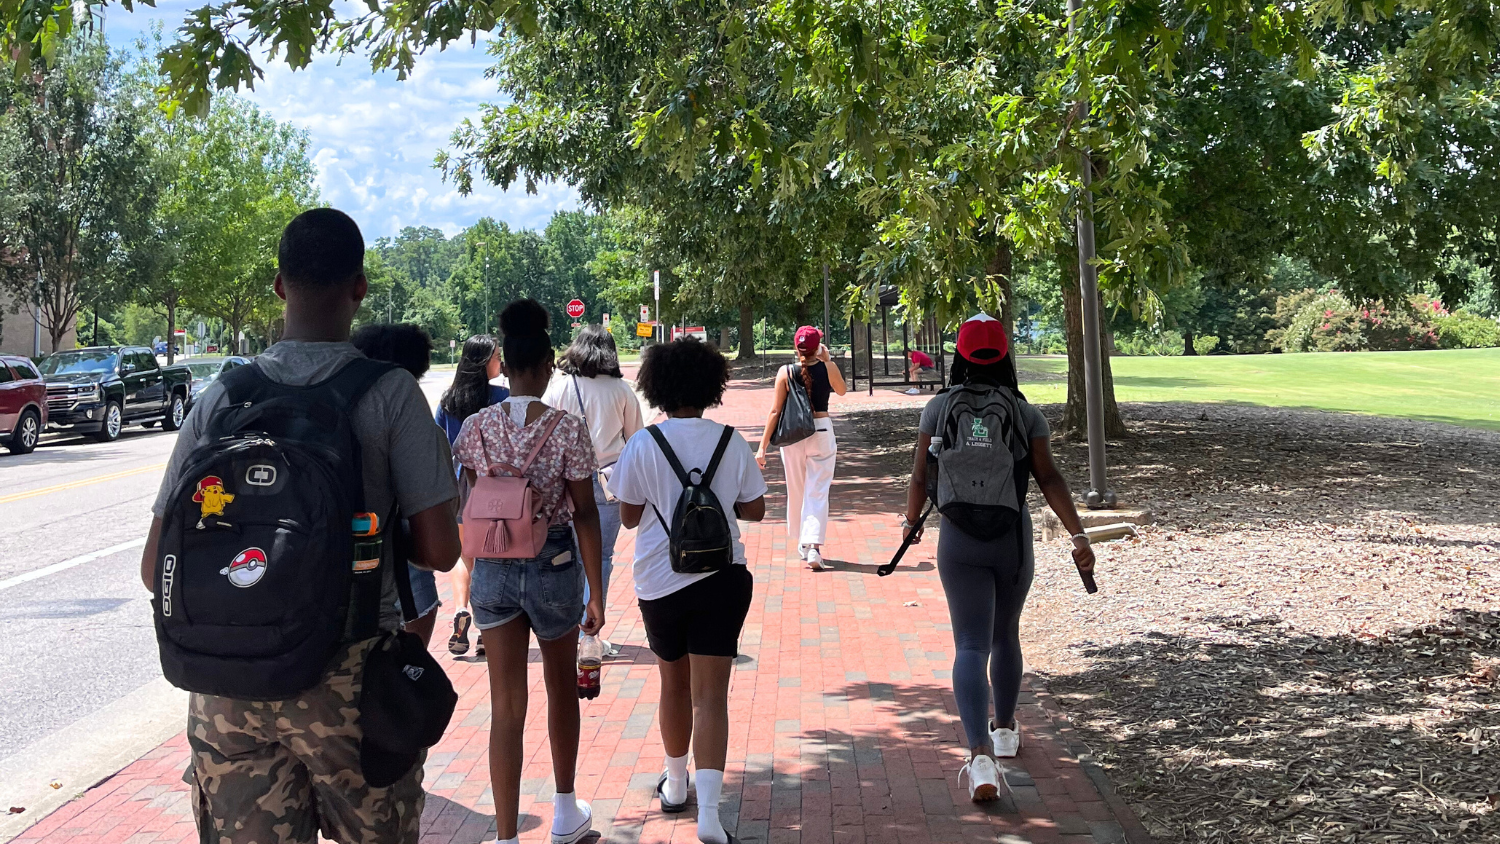 Group of High School Students walk on campus - CNR High School Summer Research Program - Forestry and Environmental Resources at NC State University